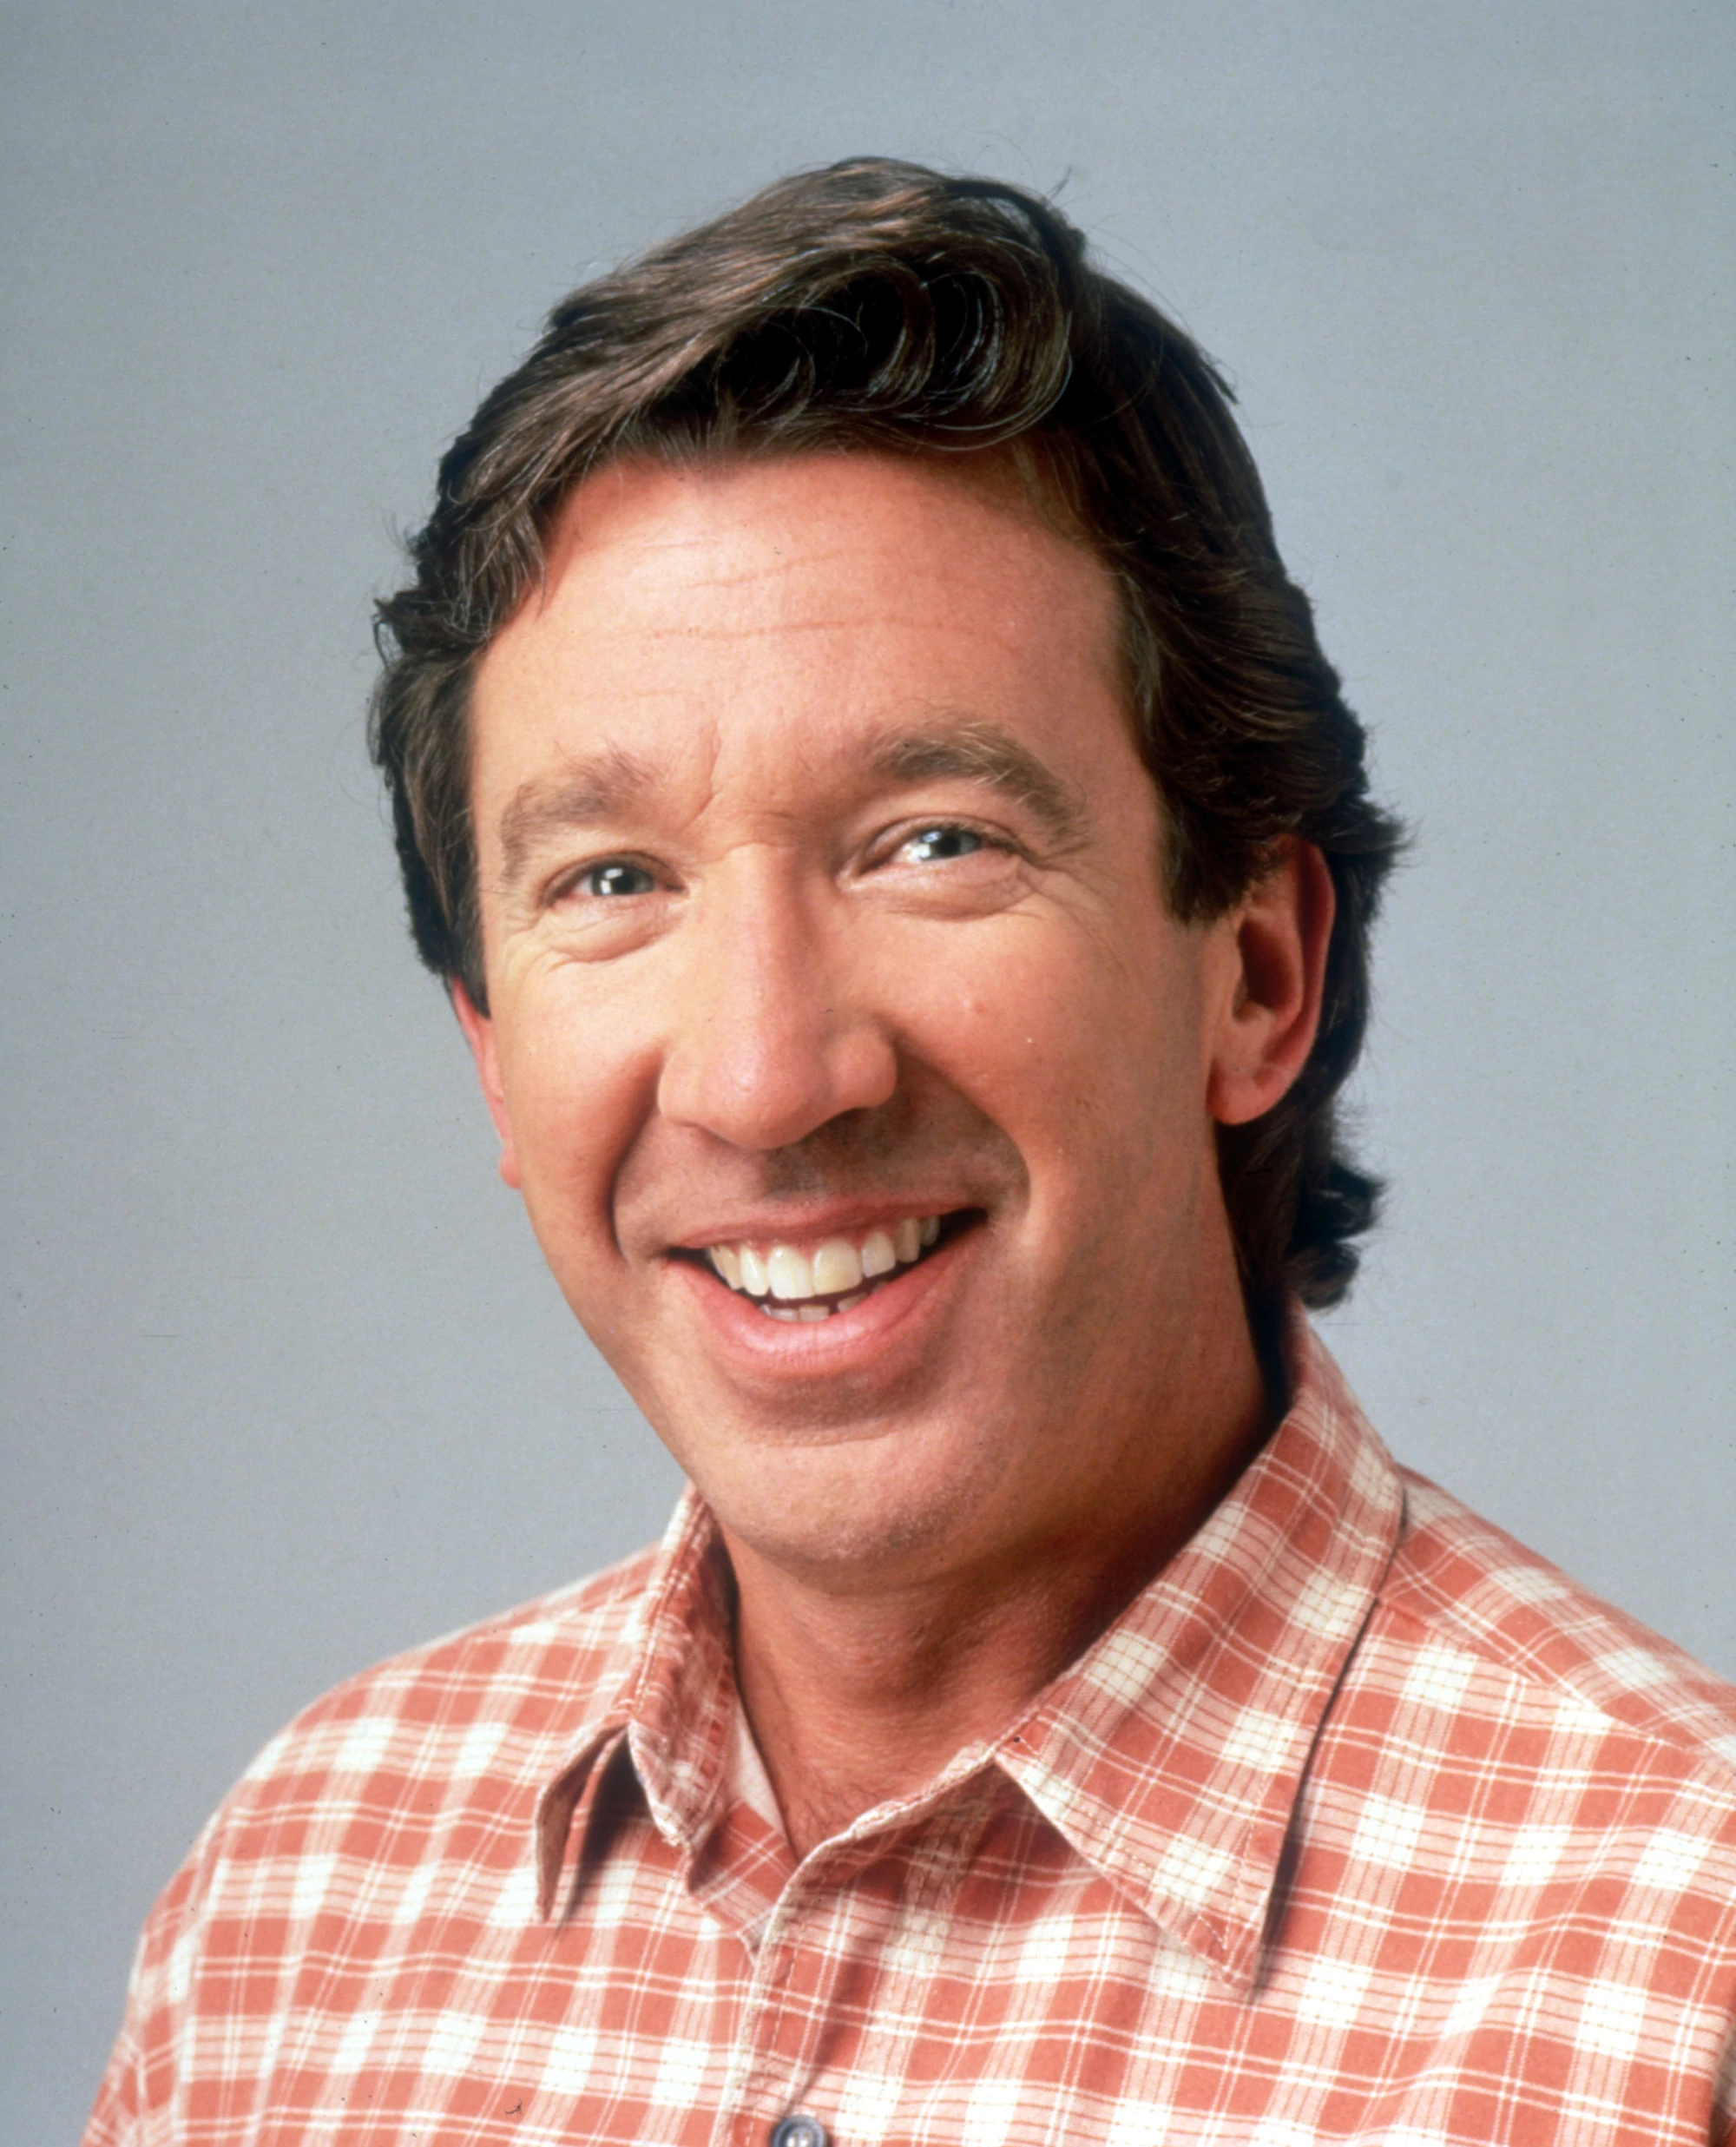 Tim Allen's yacht Michigan marina to close after gallons of fuel spill - Biography2Me